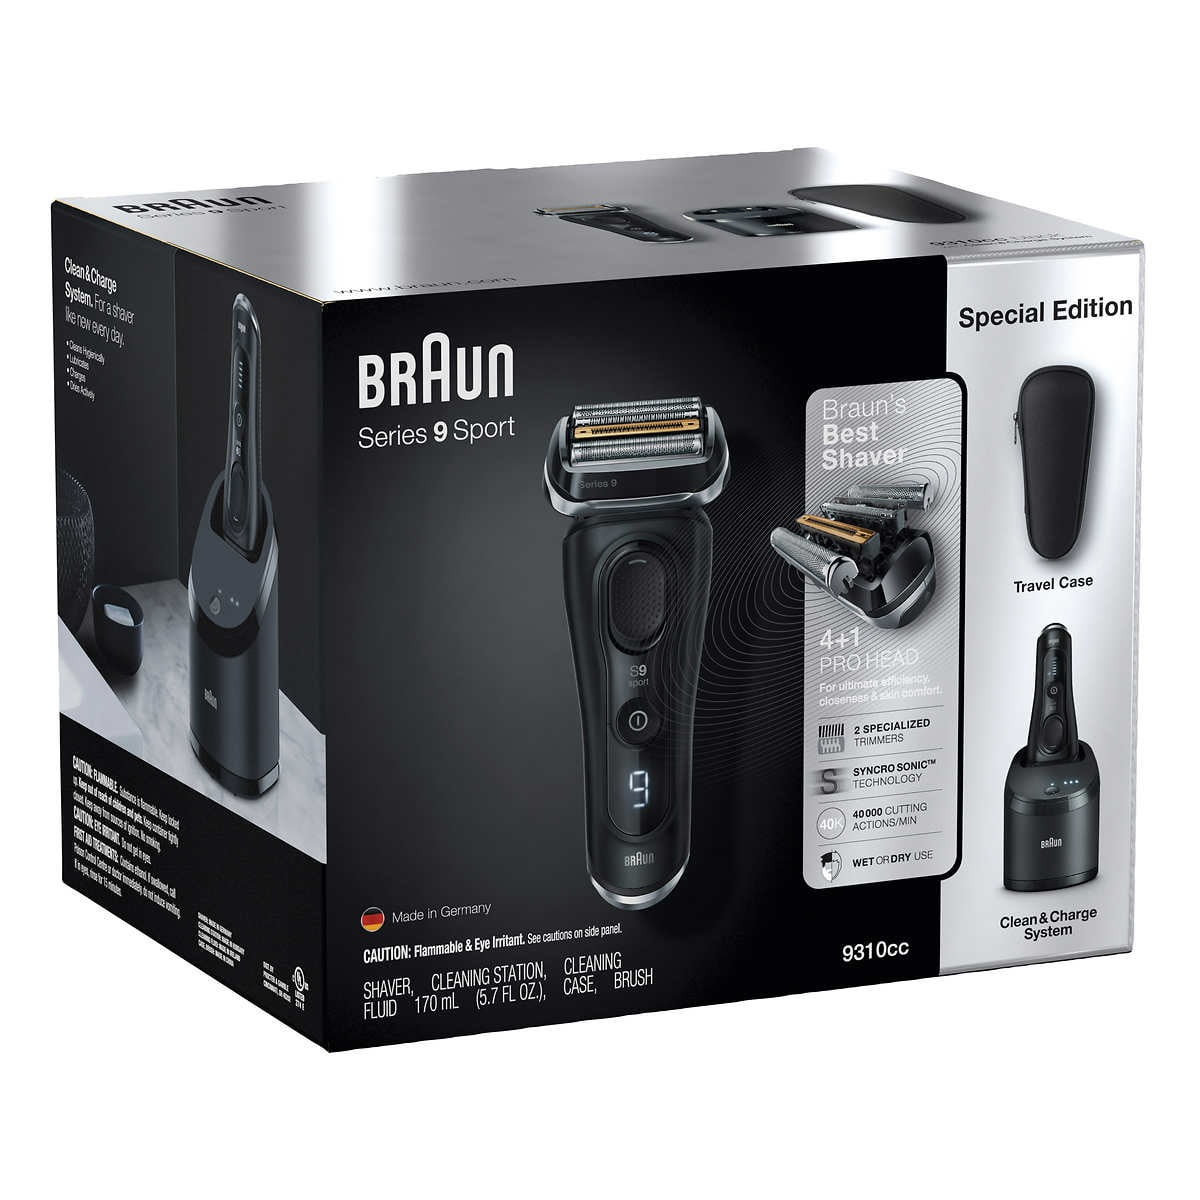 Braun Series 9 Shaver with Clean and Charge System